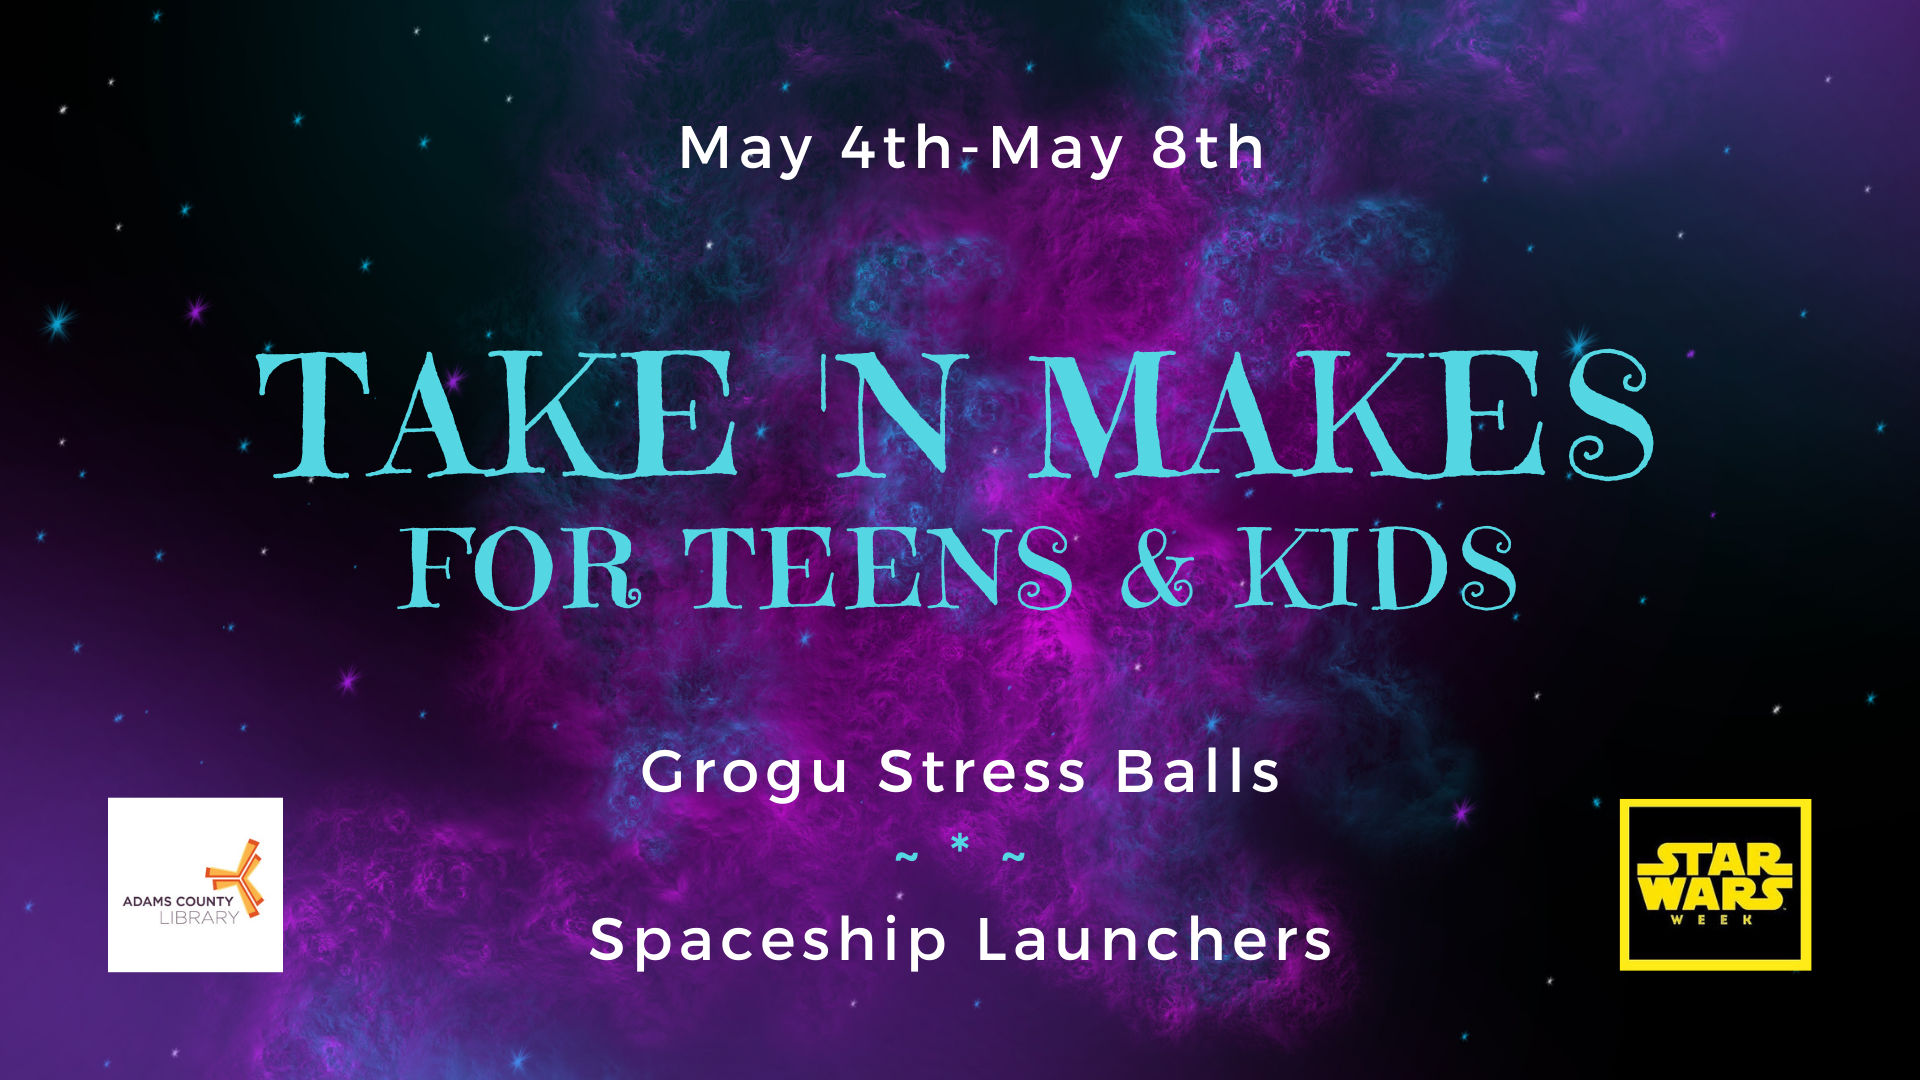 Pick up a Take n' Make for Teens & Kids from May 2nd through May 8th. This month we are making Grogu Stress Balls and Spaceship Launchers in honor of Star Wars Week!